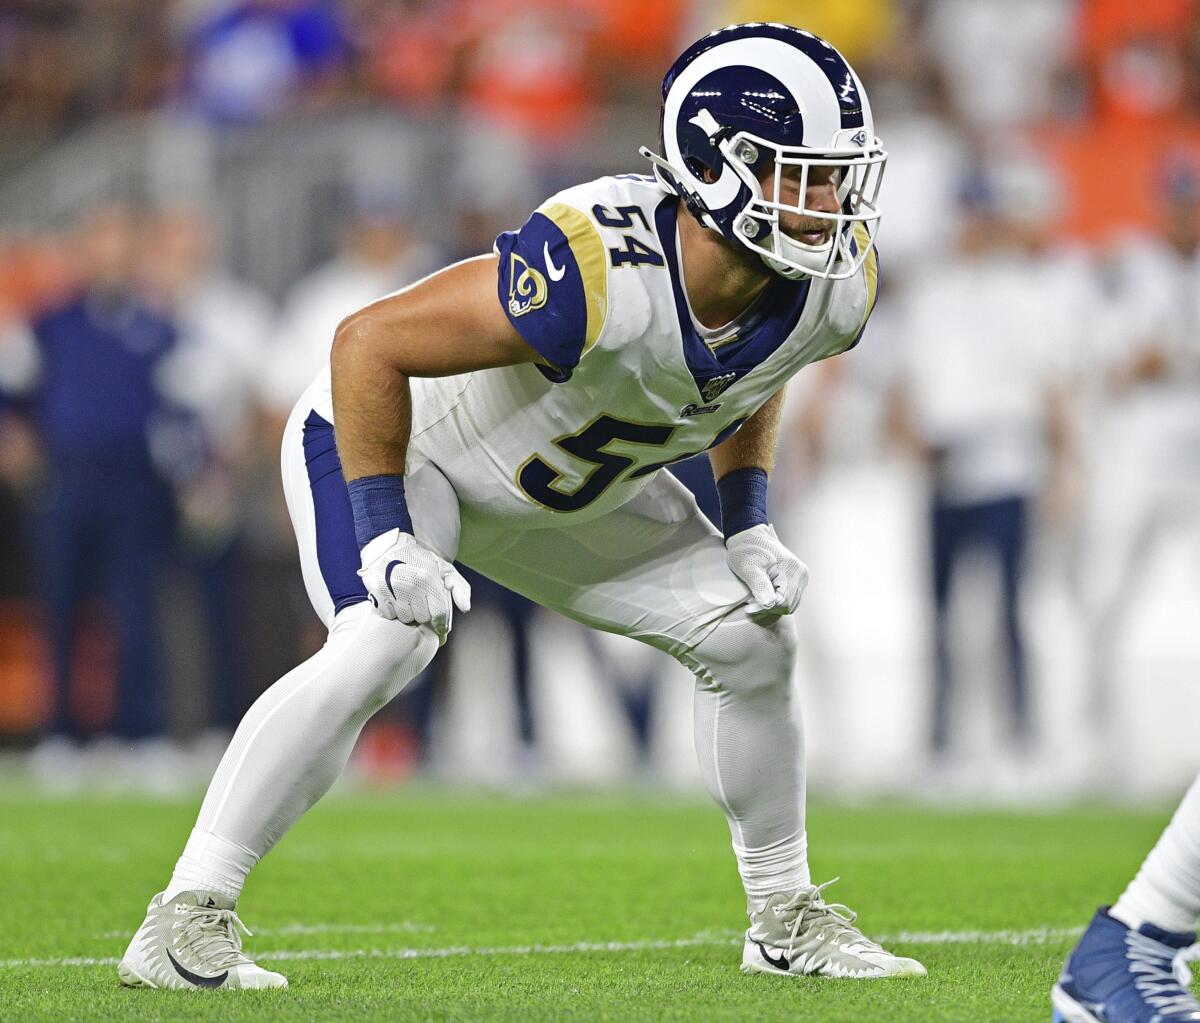 Los Angeles Rams linebacker Bryce Hager waits for the snap of the ball during the first half of an NFL football game against the Cleveland Browns, Sunday, Sept. 22, 2019, in Cleveland. The Rams won 20-13. (AP Photo/David Dermer)